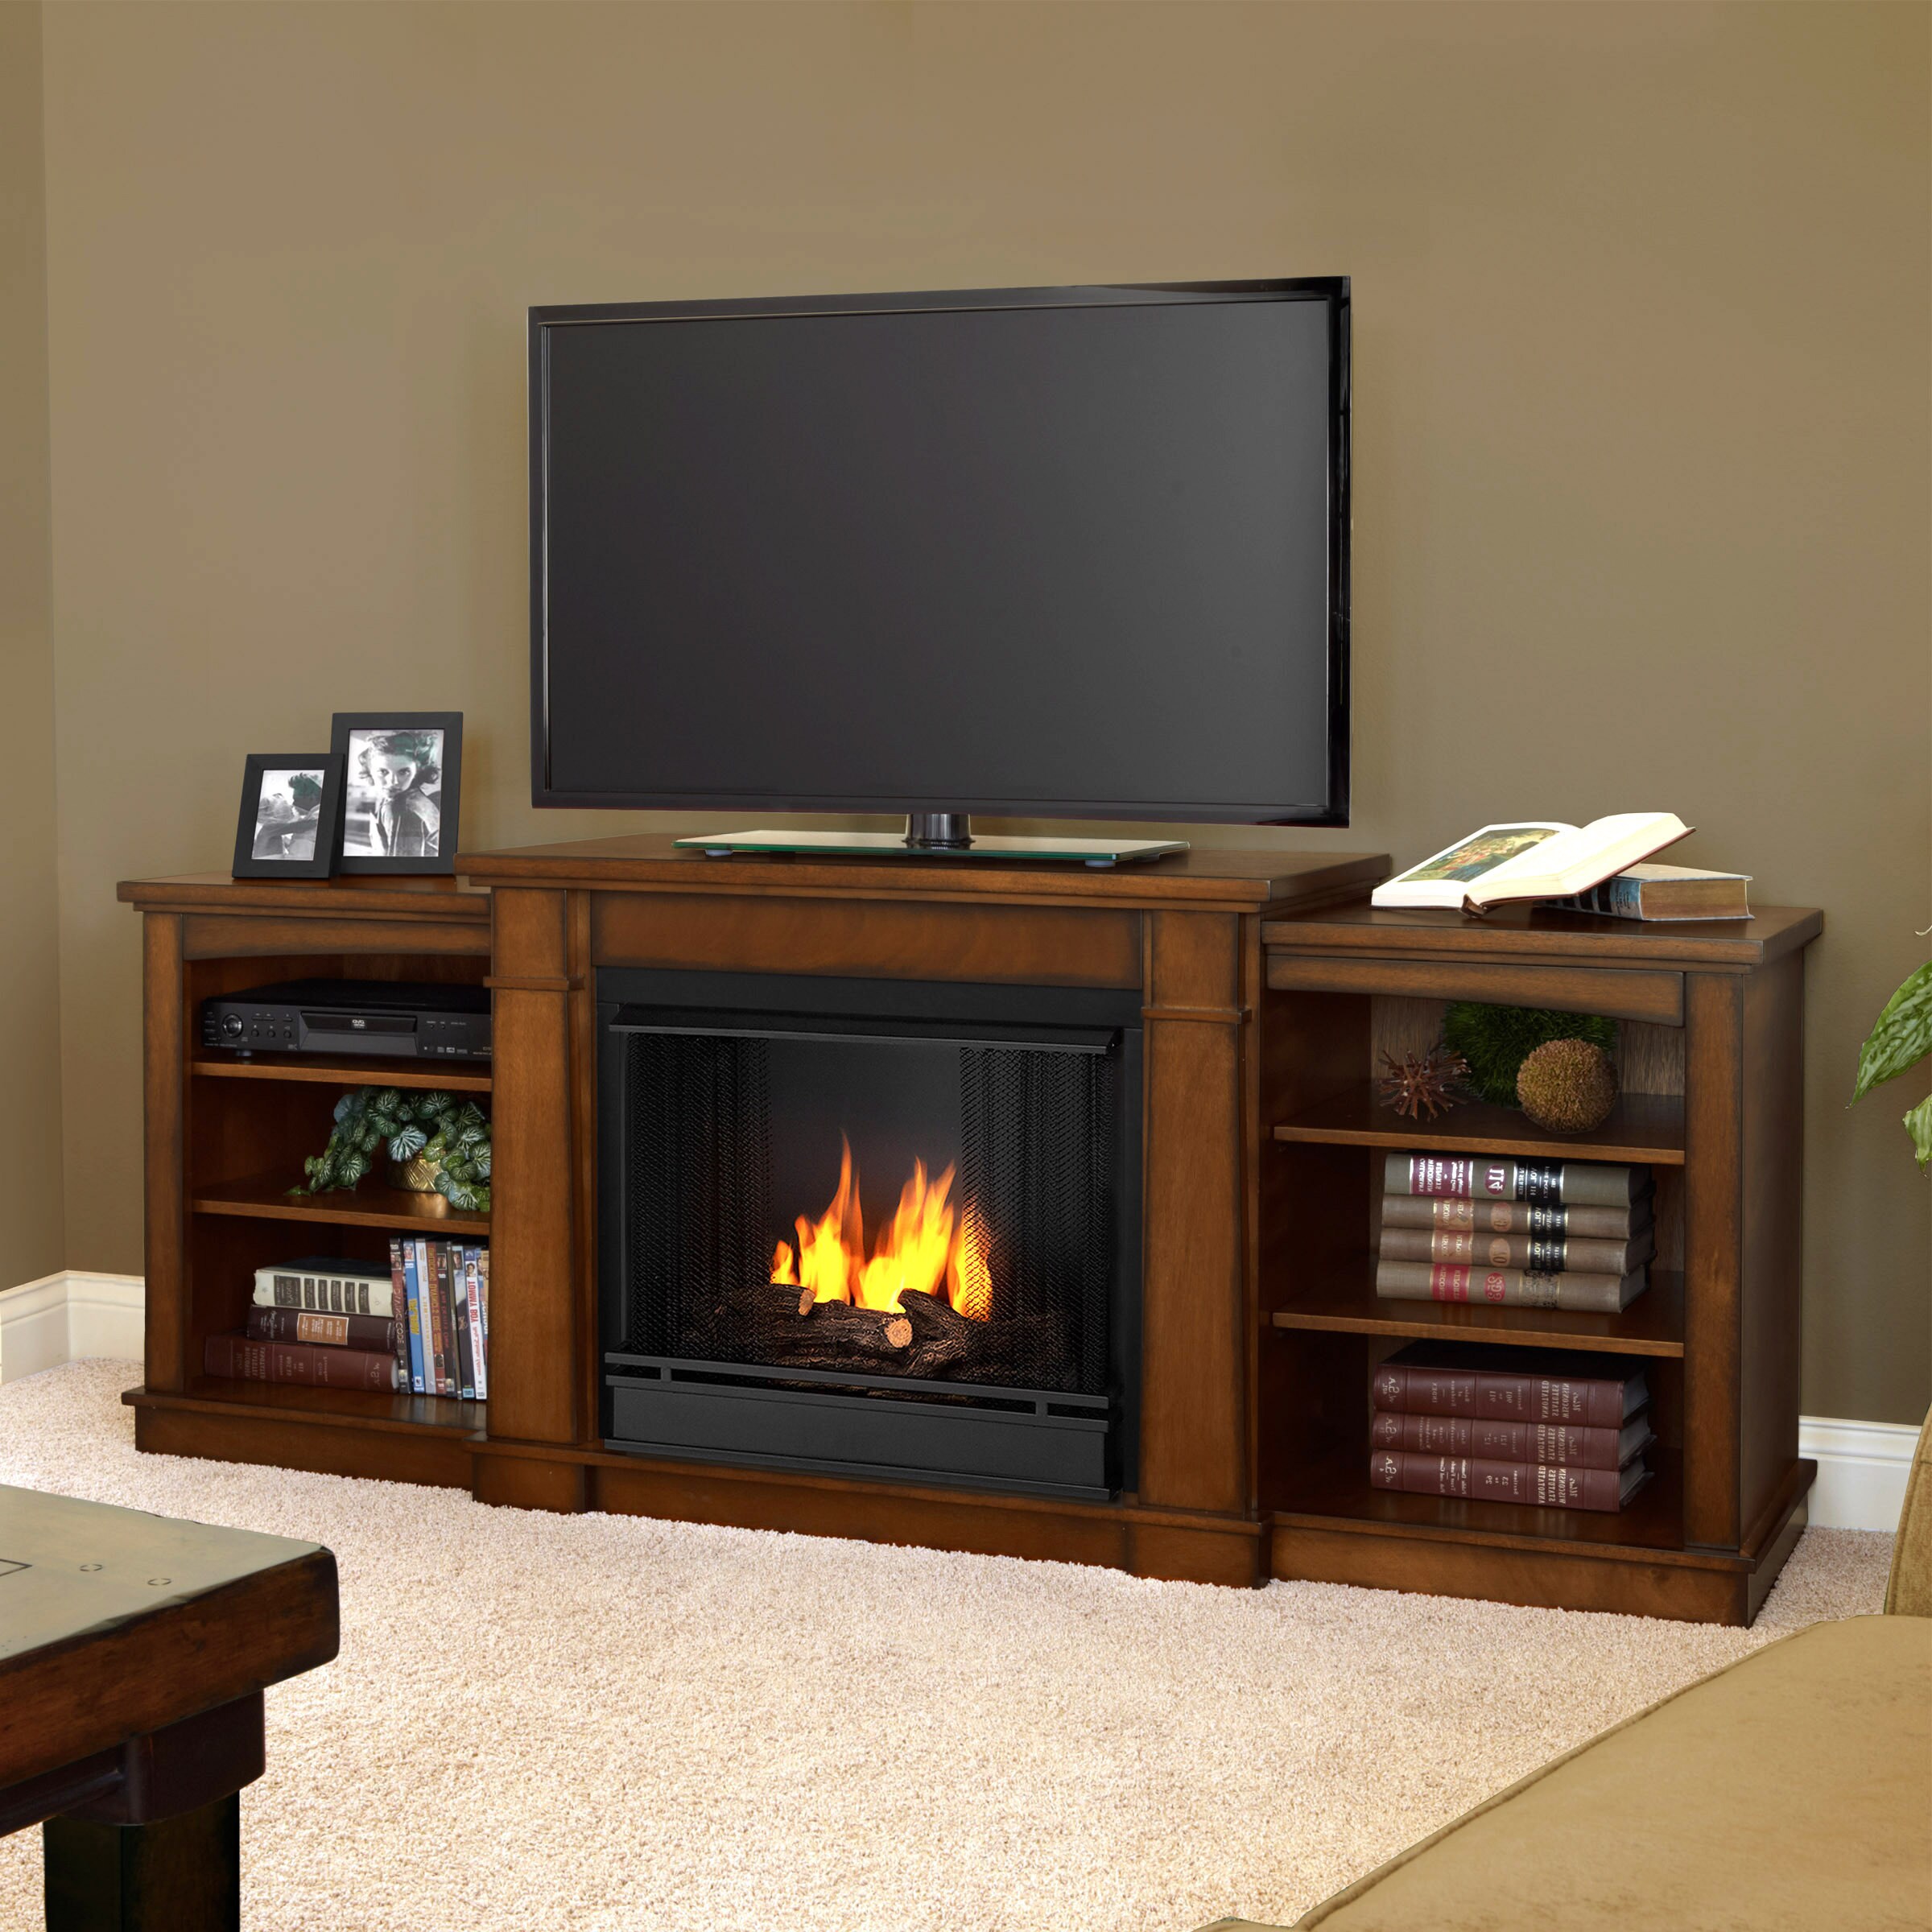 Real Flame Burnished Oak Gel Fuel Fireplace Today $779.99